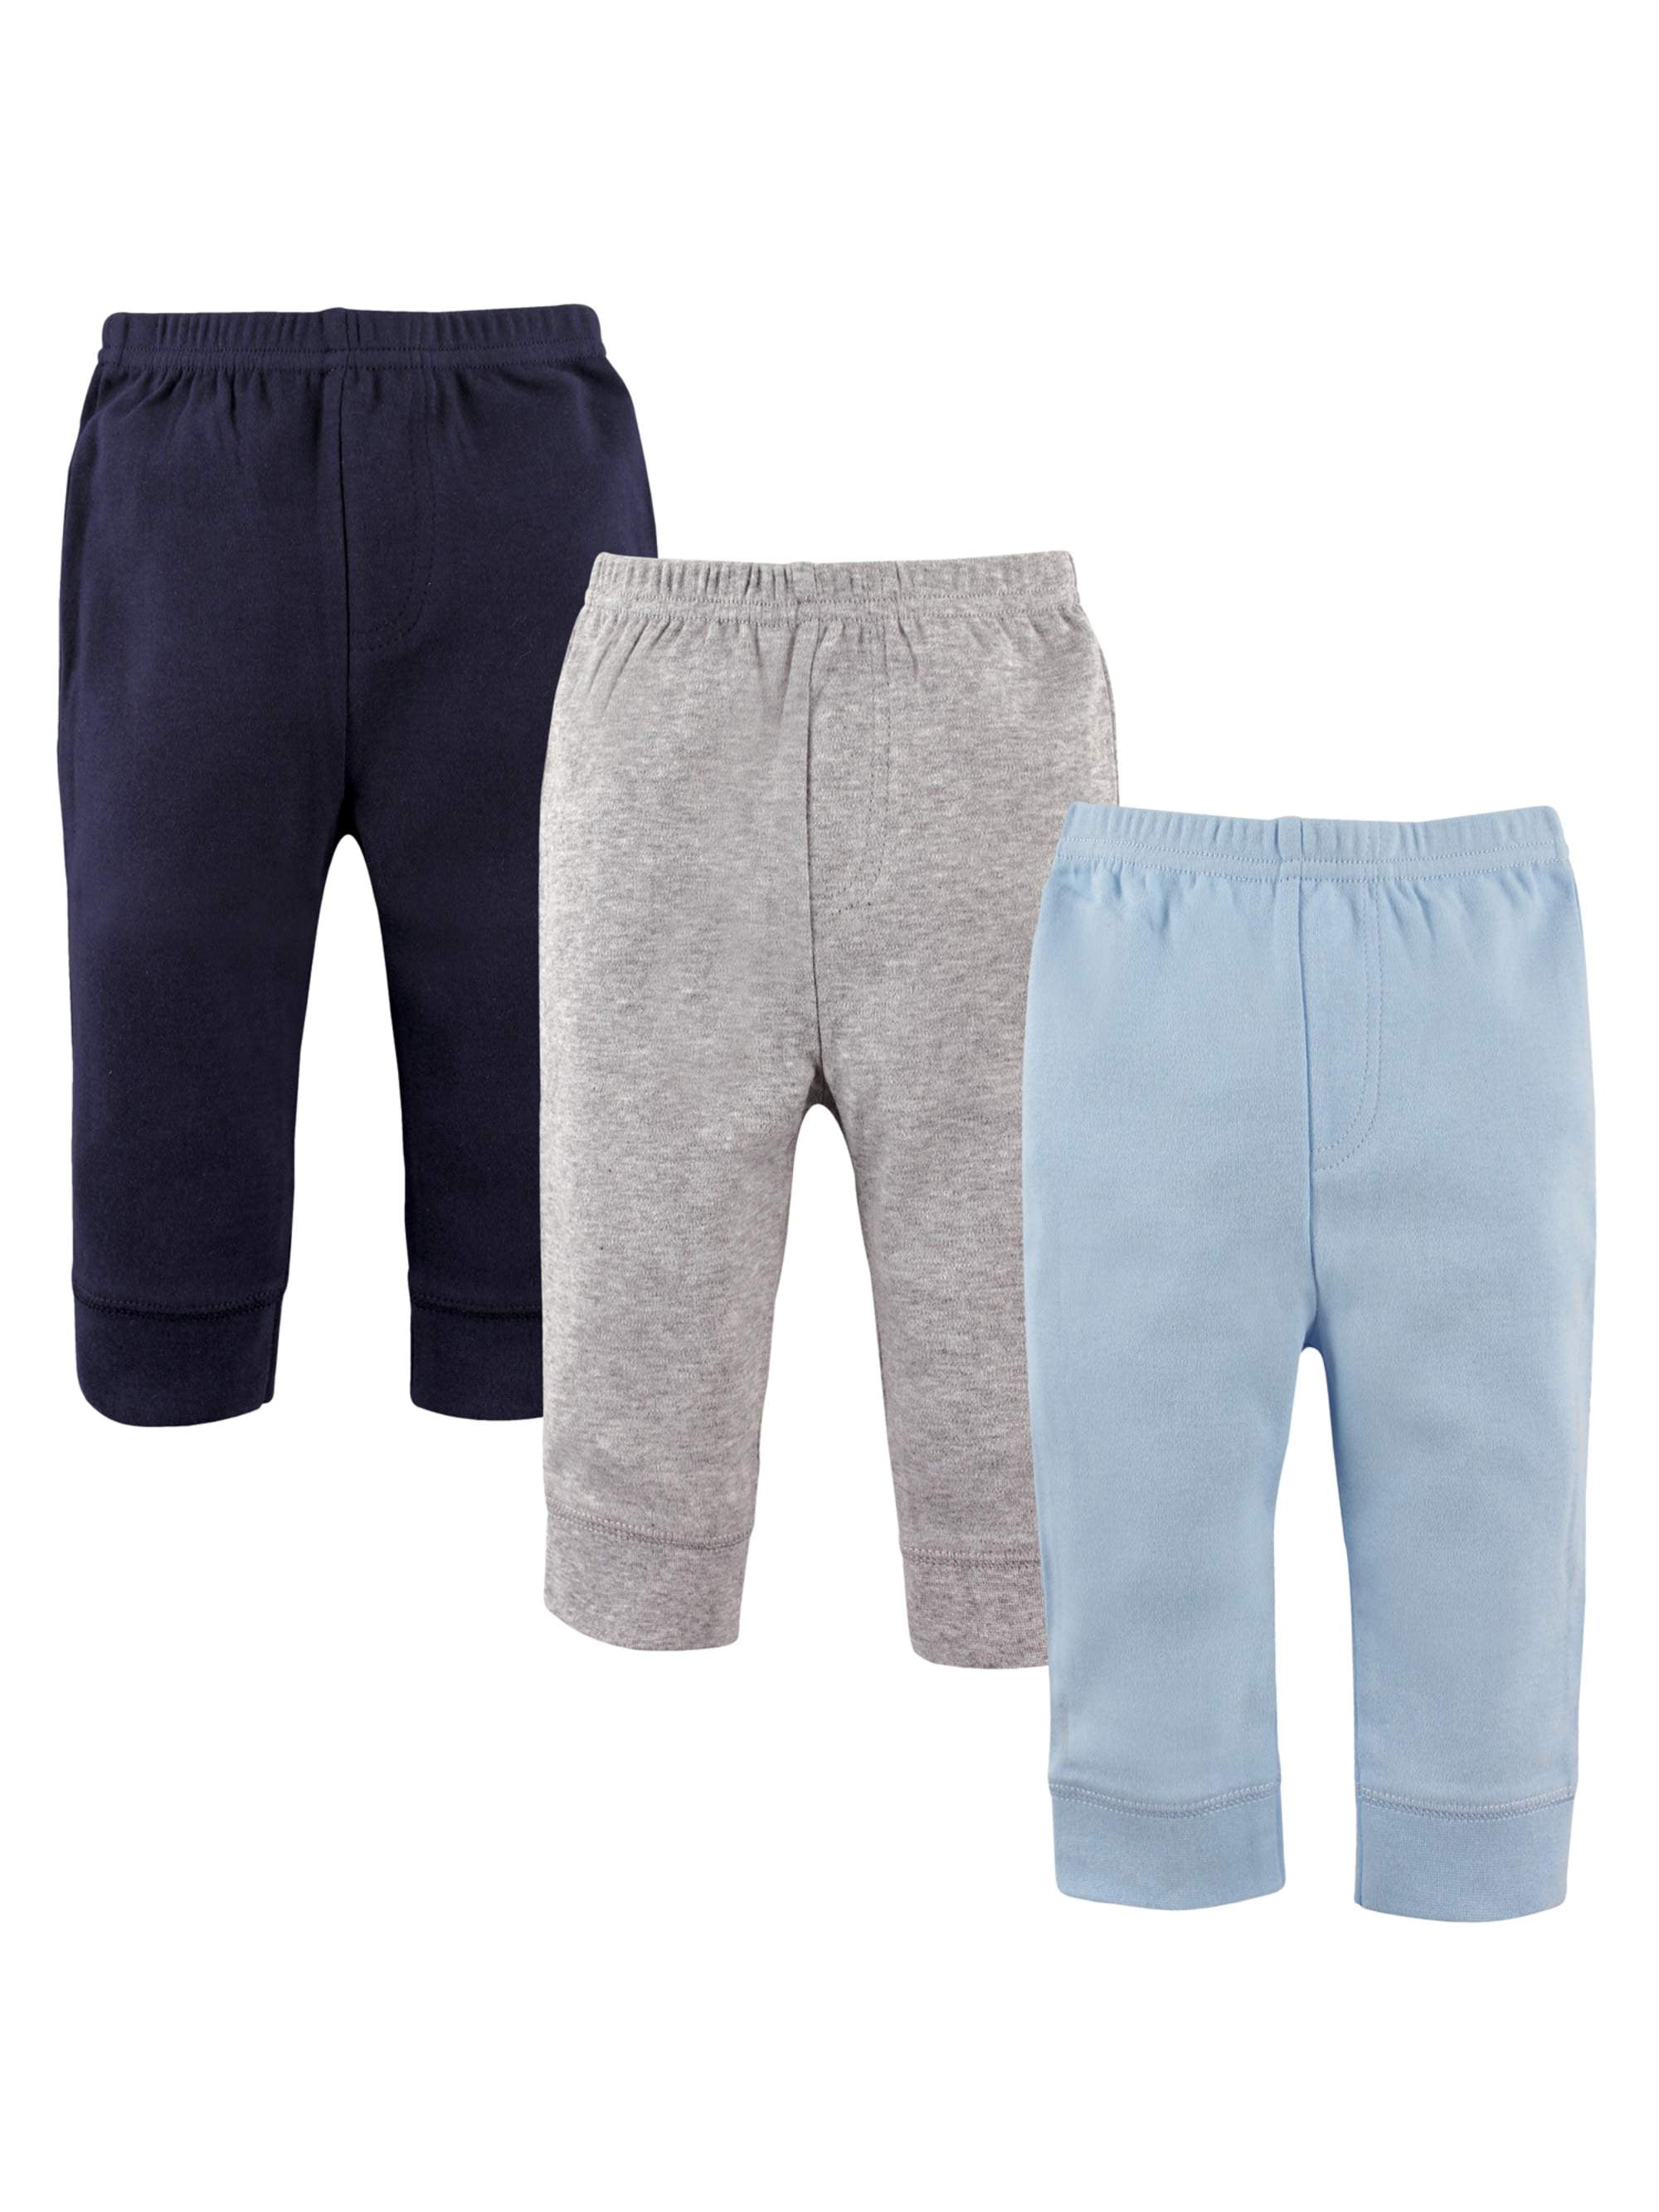 Boys pants. Брюки Luvable friends. Бриджи Luvable friends. Regular Pants for boys. Poetry Pants Baby by Green Cotton.